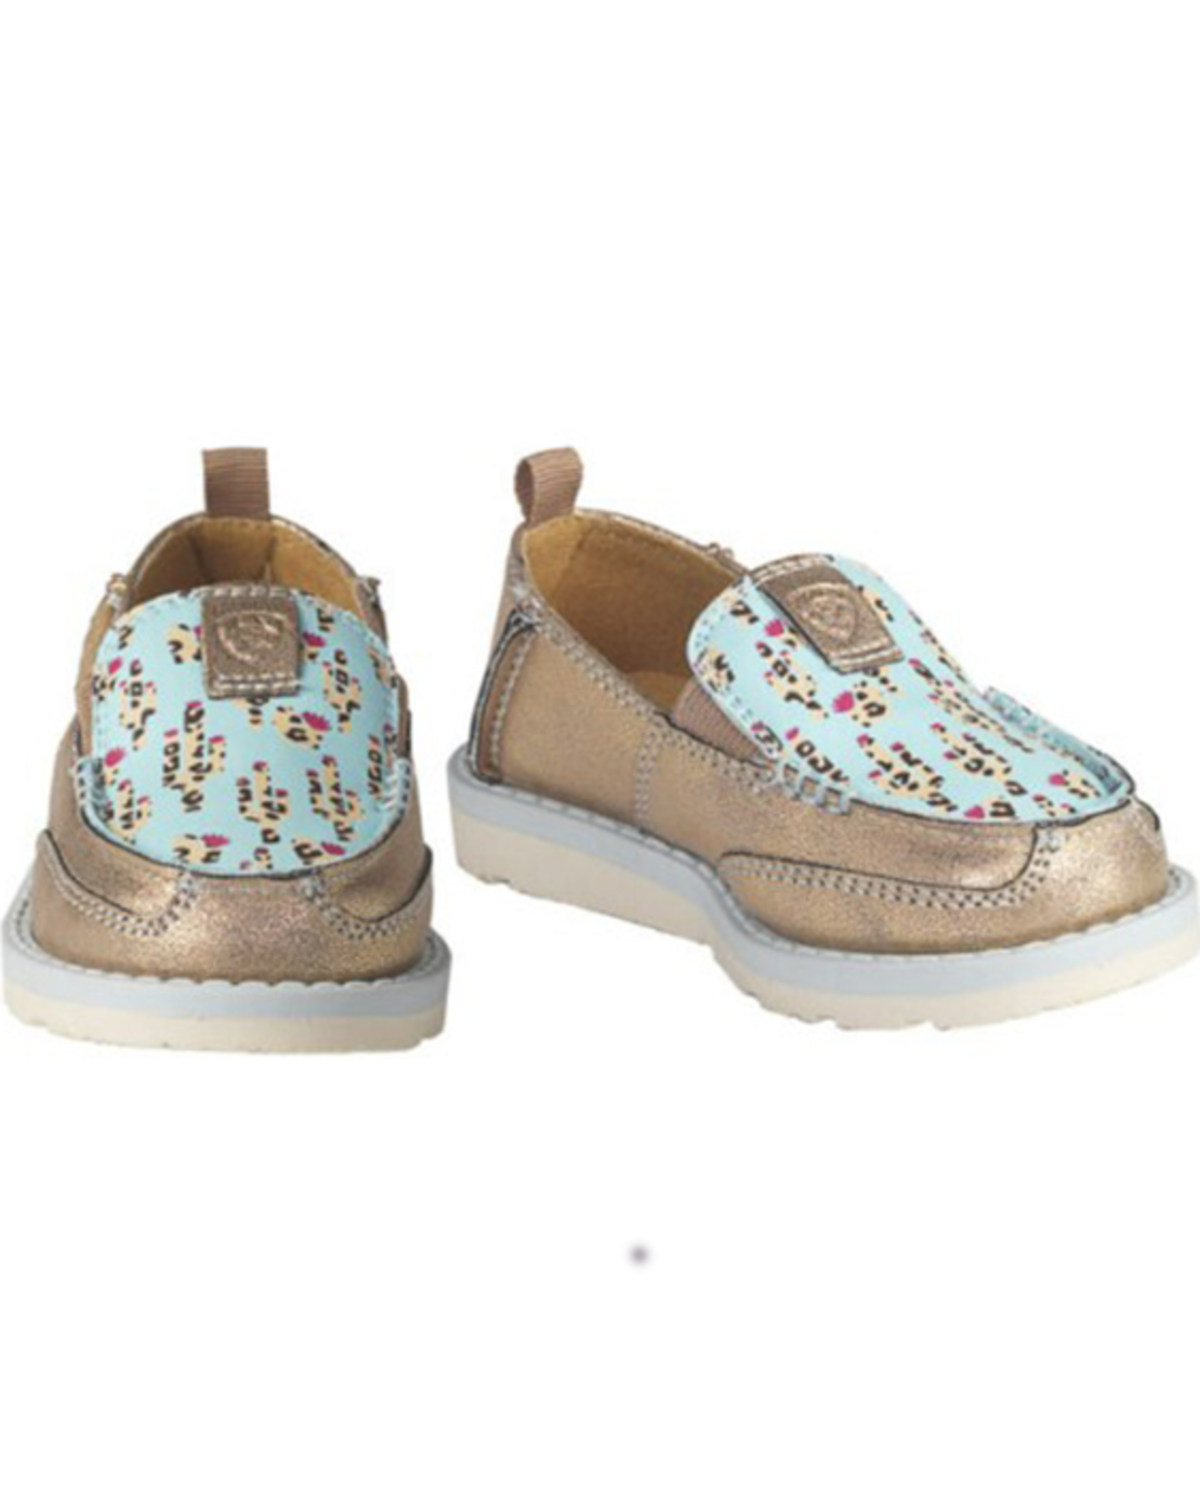 Ariat Toddler-Girls' Crusier Piper Cactus Print Slip-On Casual Shoes - Moc Toe